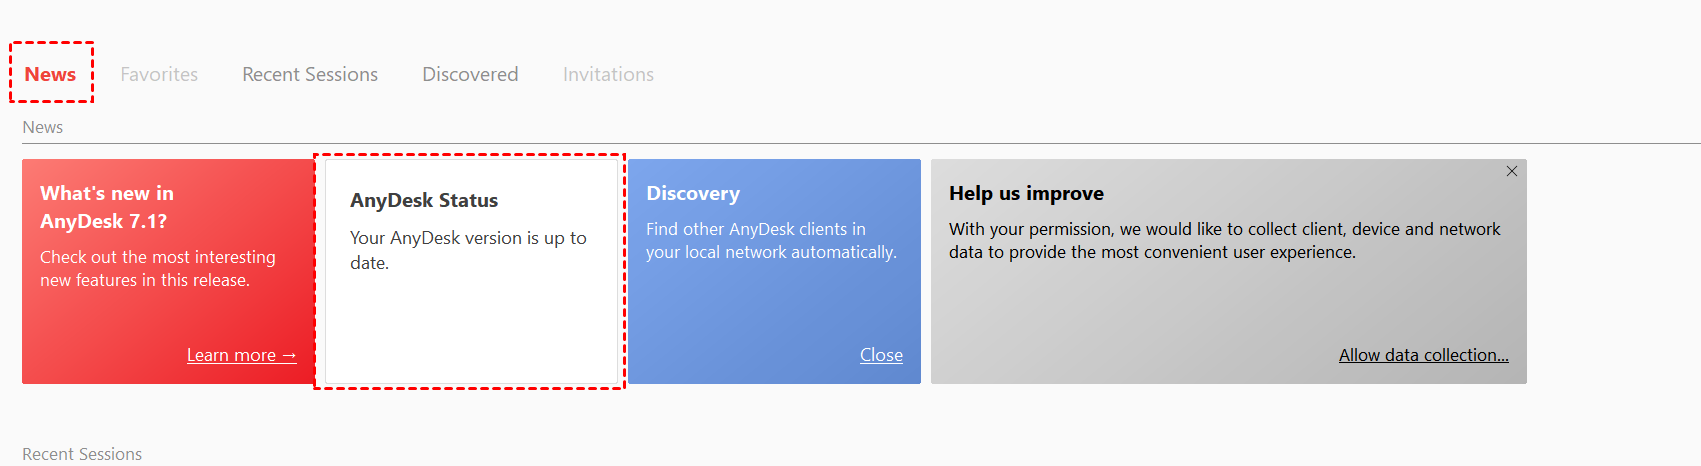 https://www.anyviewer.com/screenshot/others/anydesk/anydesk-status.png